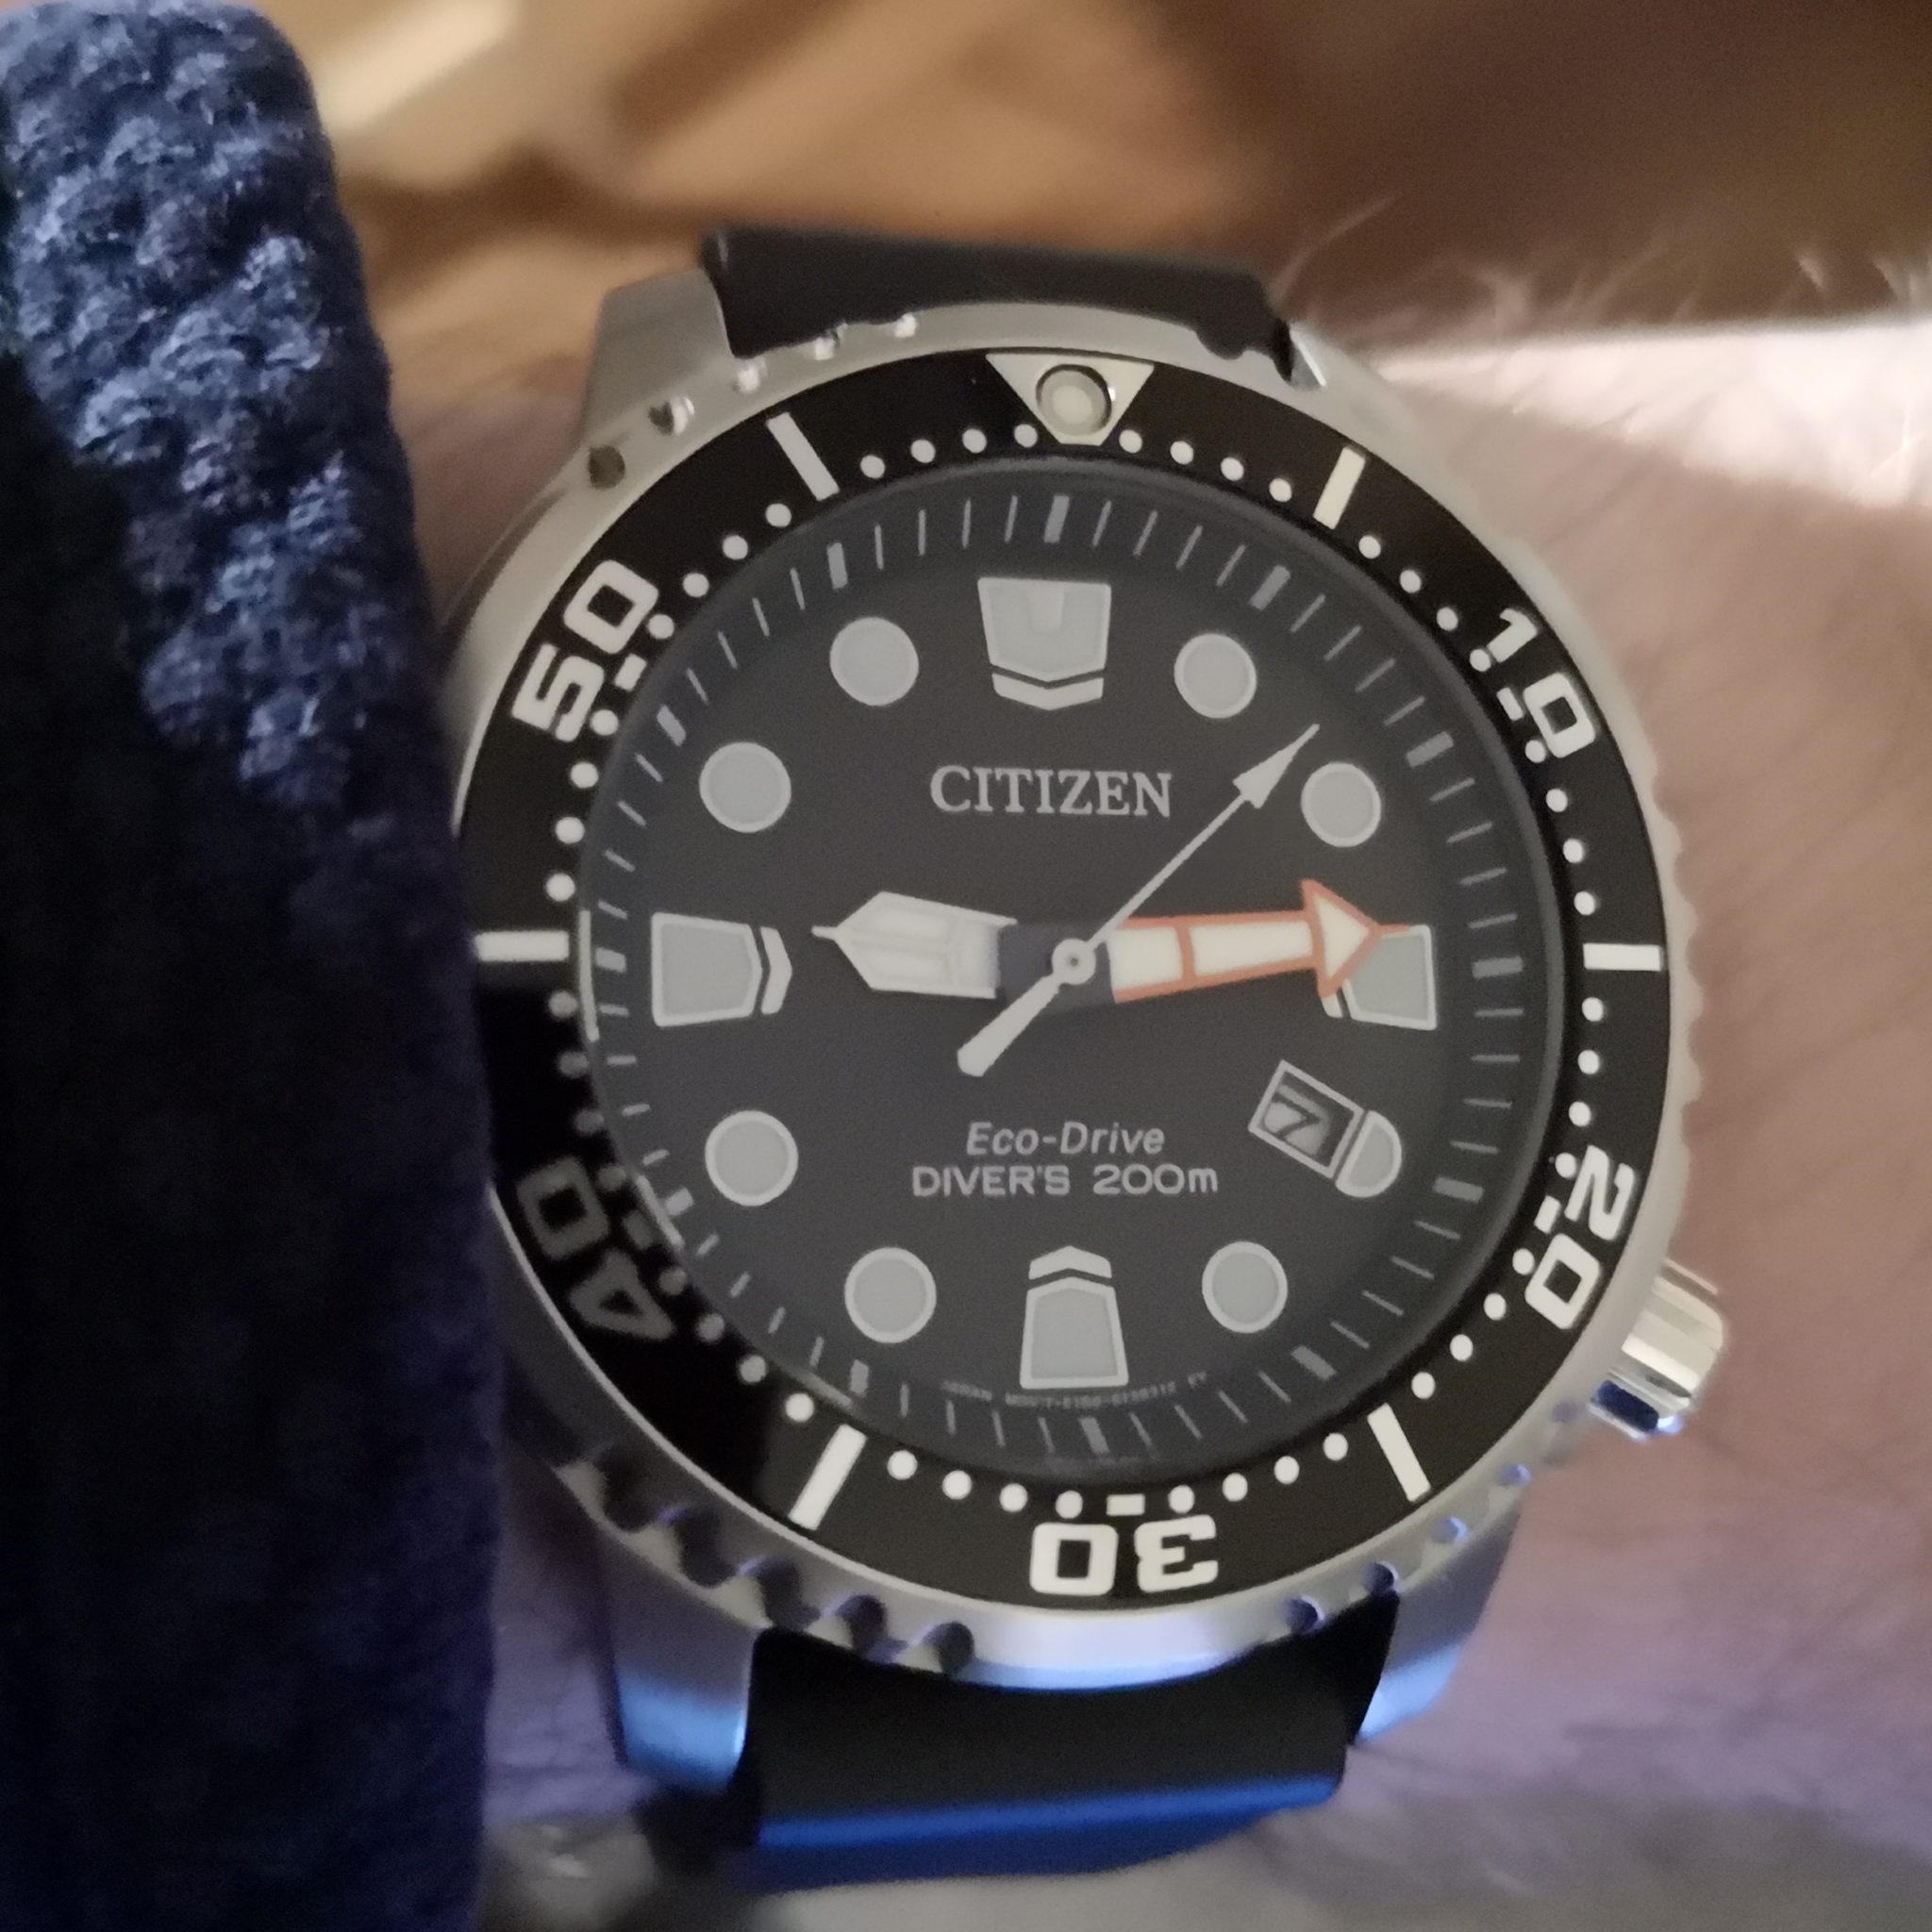 Owner Review: Citizen Eco-Drive Promaster Diver - FIFTH WRIST